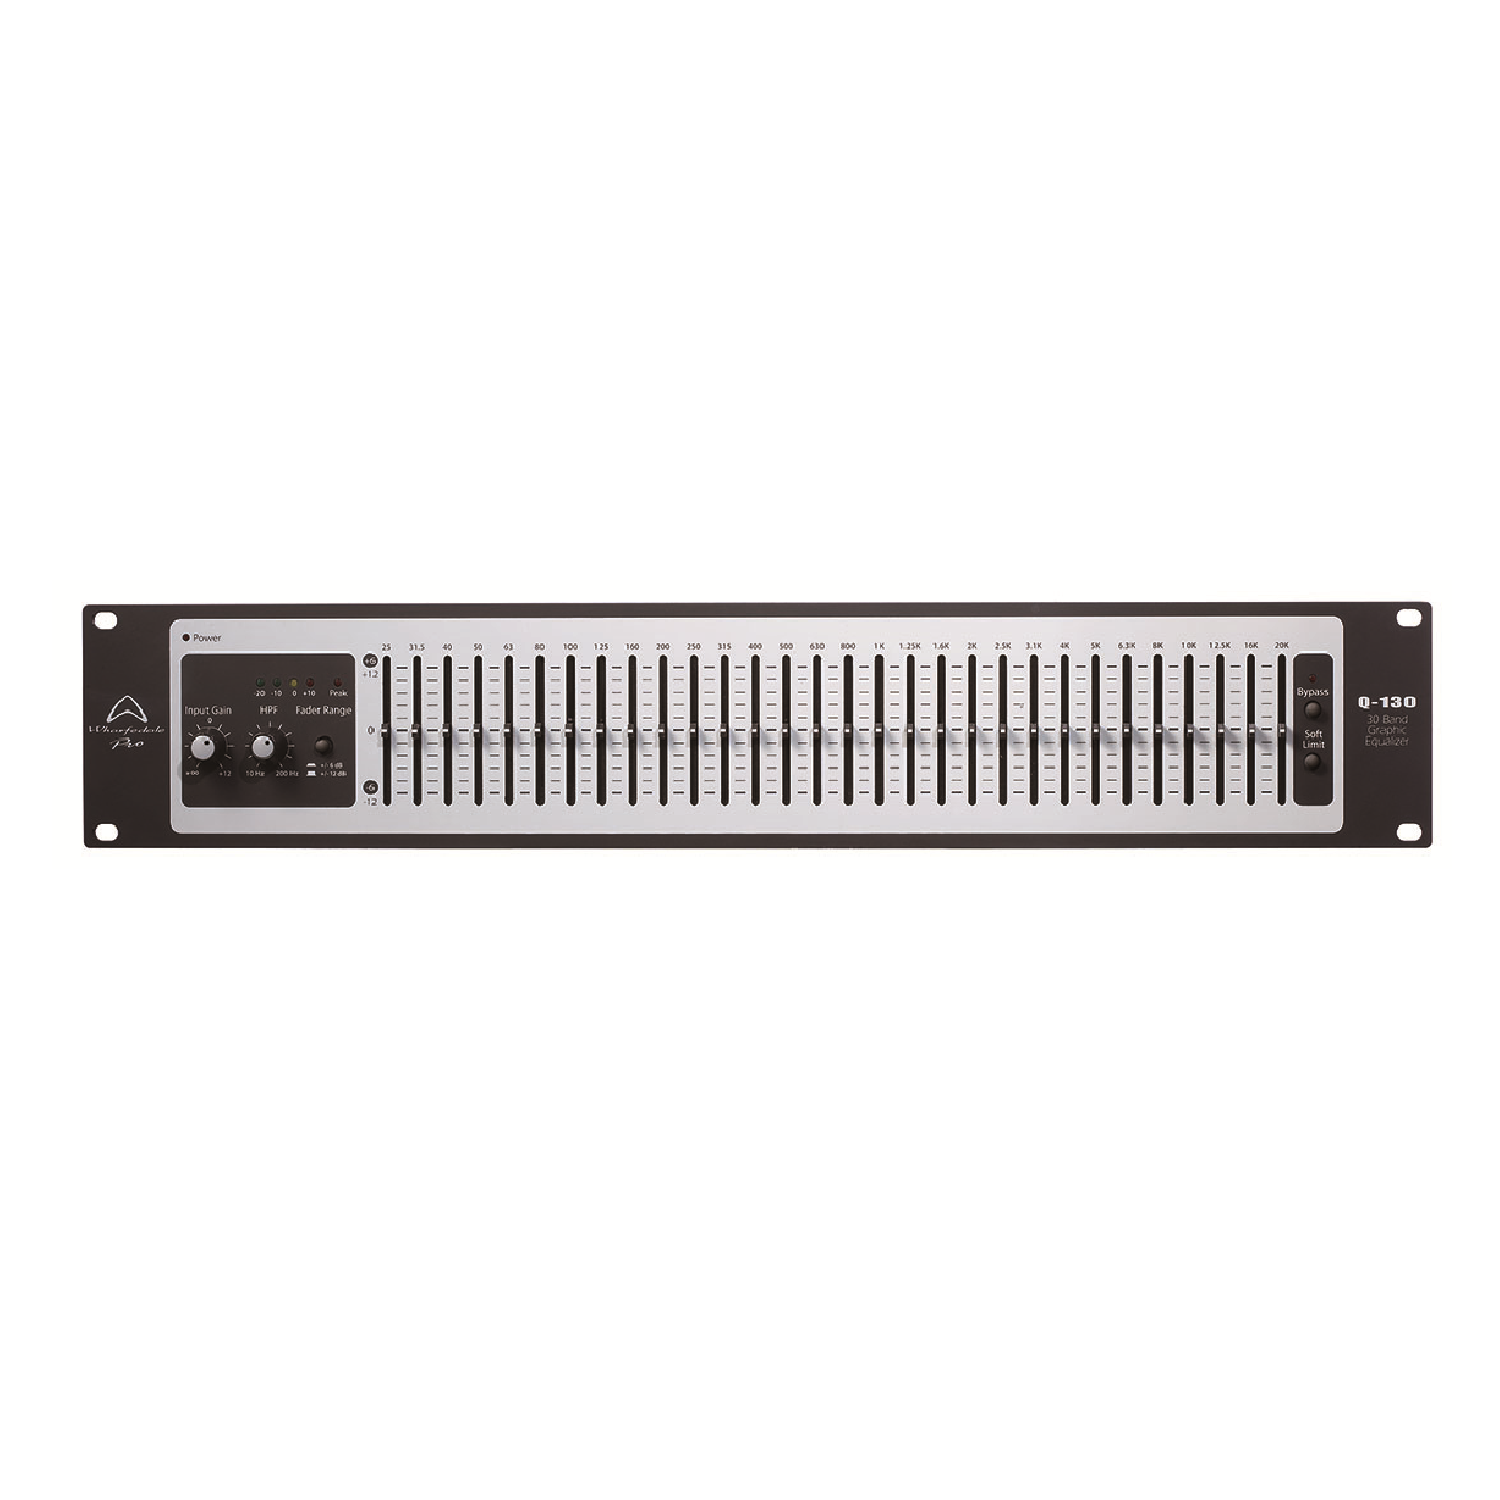 Single Channel 30 band Equalizer Buit-in Soft Limiter Q 130 wharfedale